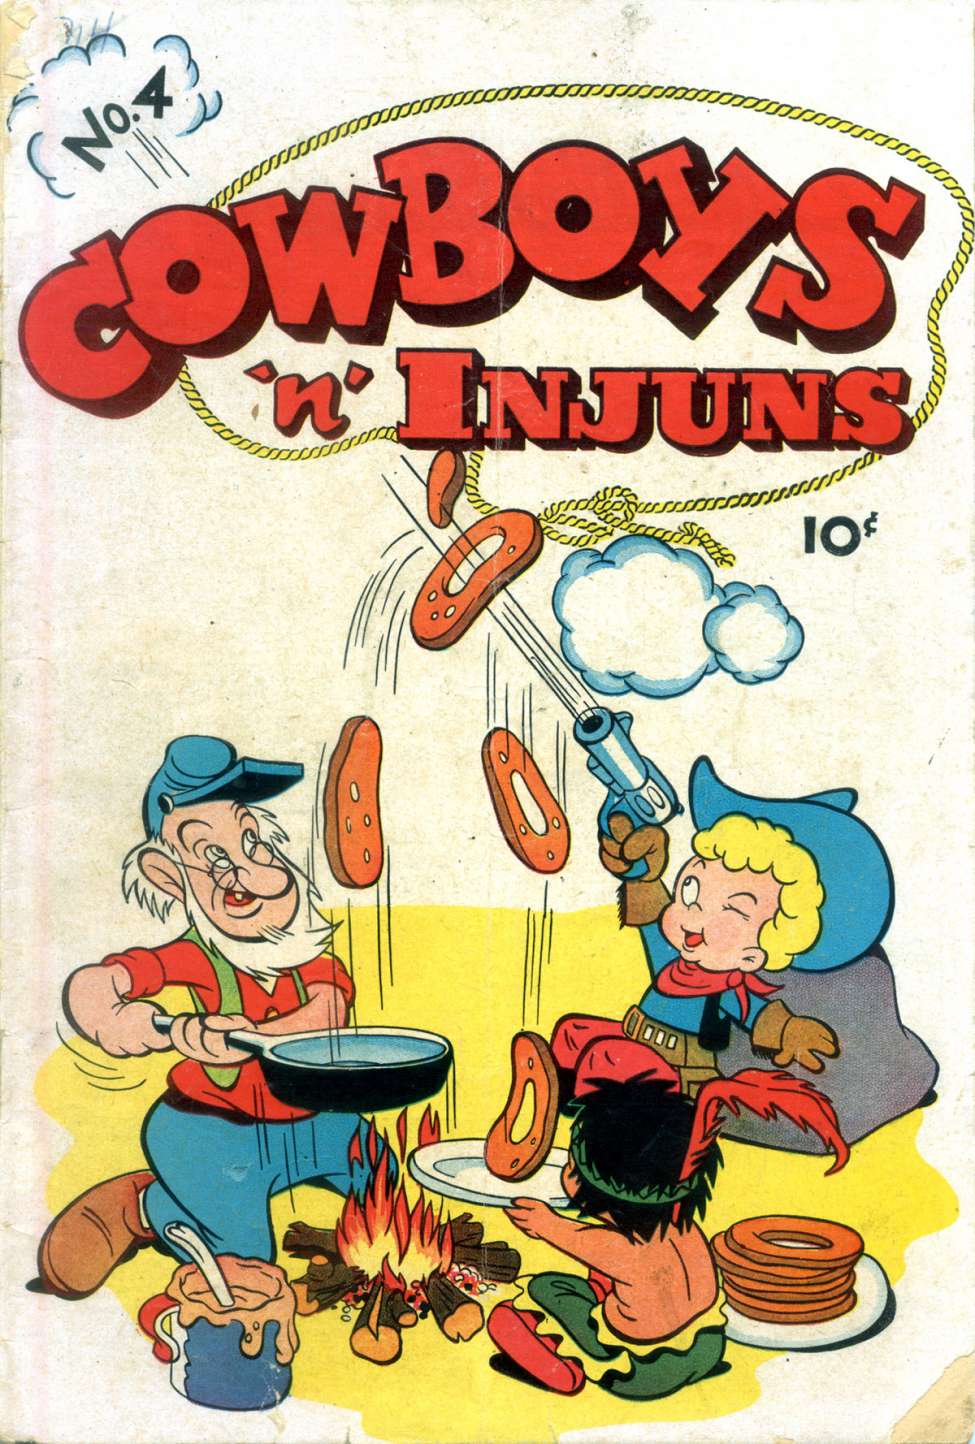 Book Cover For Cowboys 'N' Injuns 4